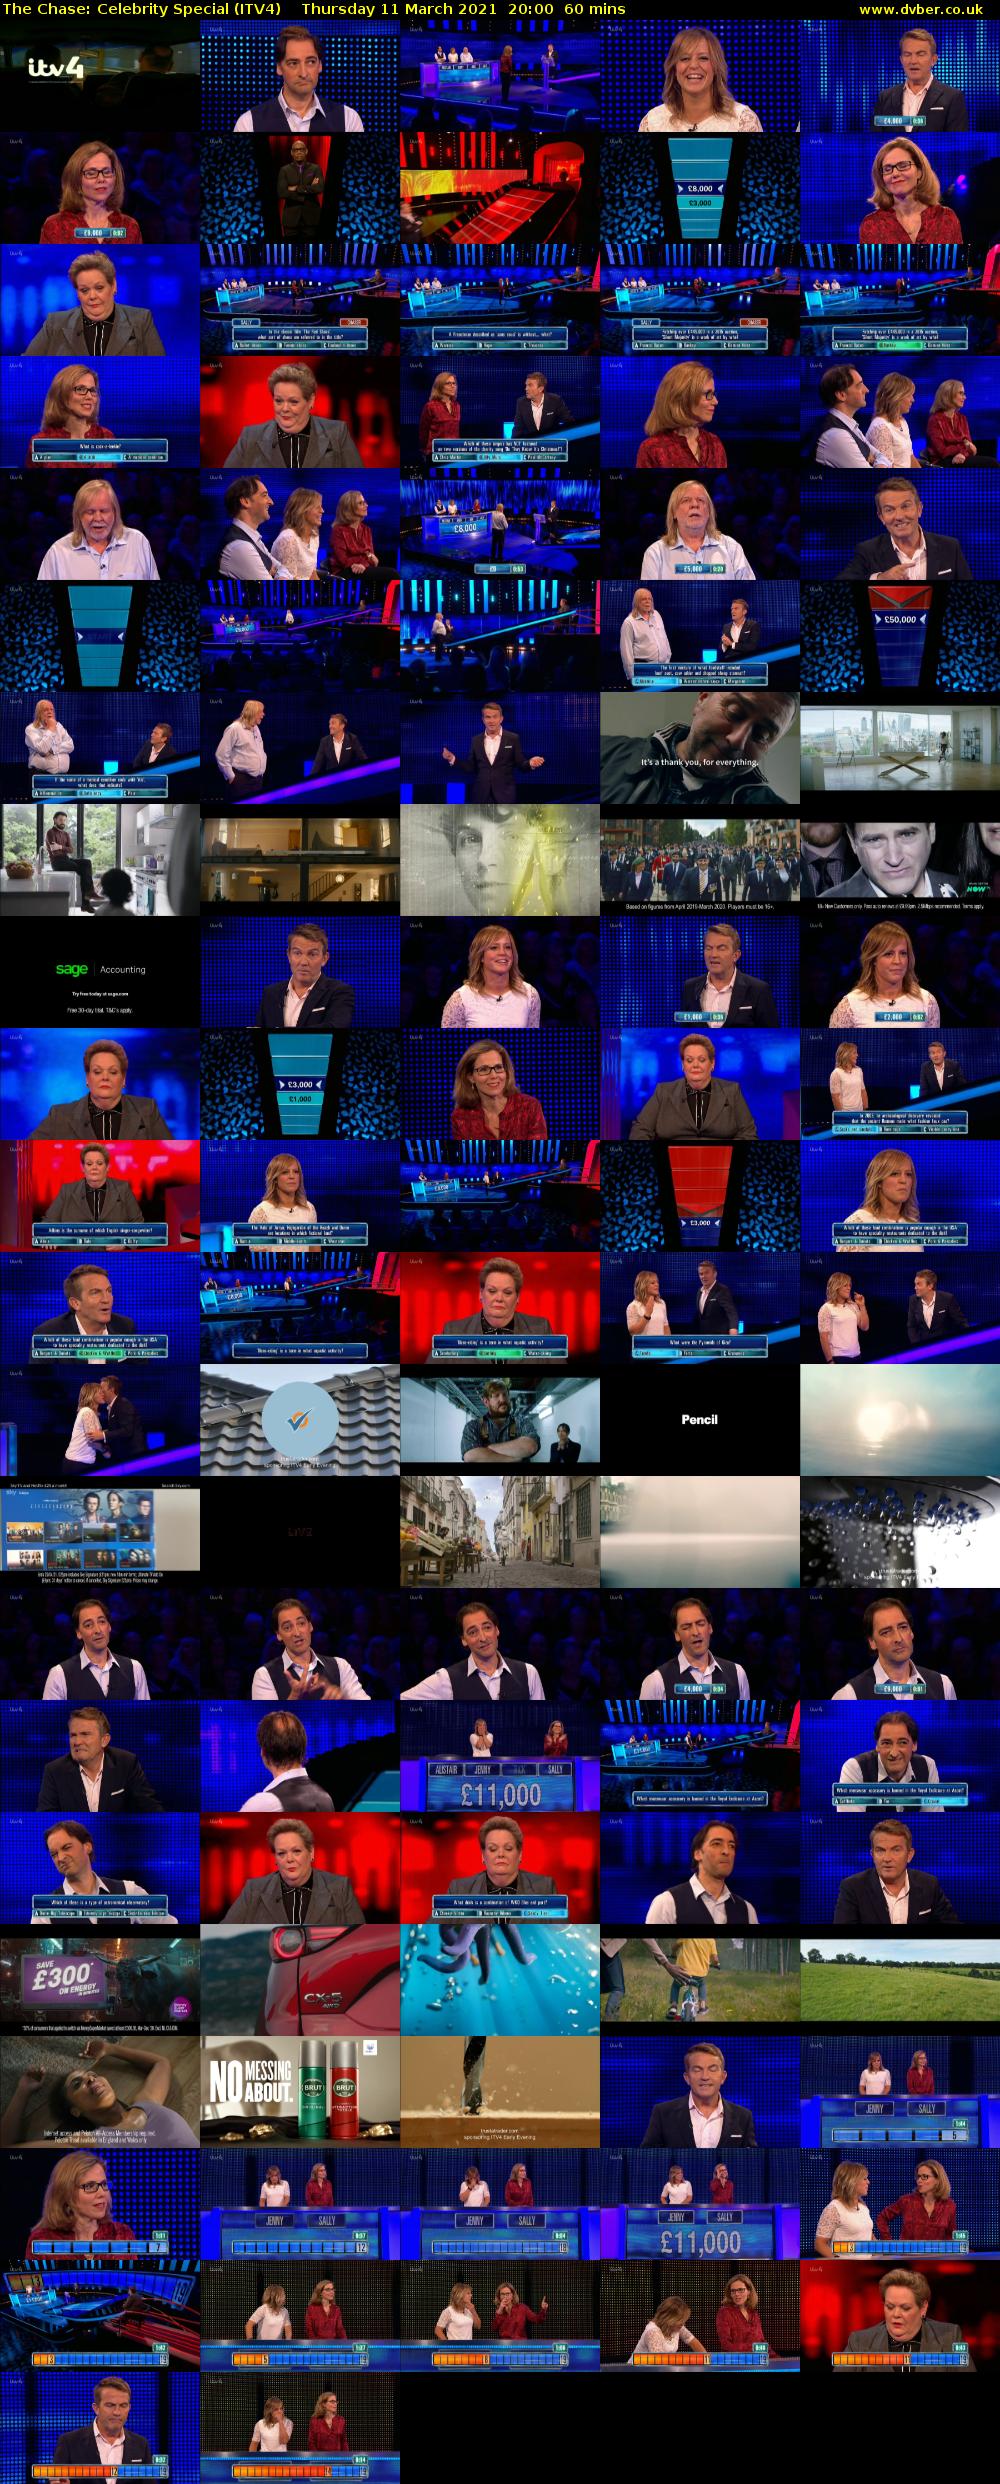 The Chase: Celebrity Special (ITV4) Thursday 11 March 2021 20:00 - 21:00